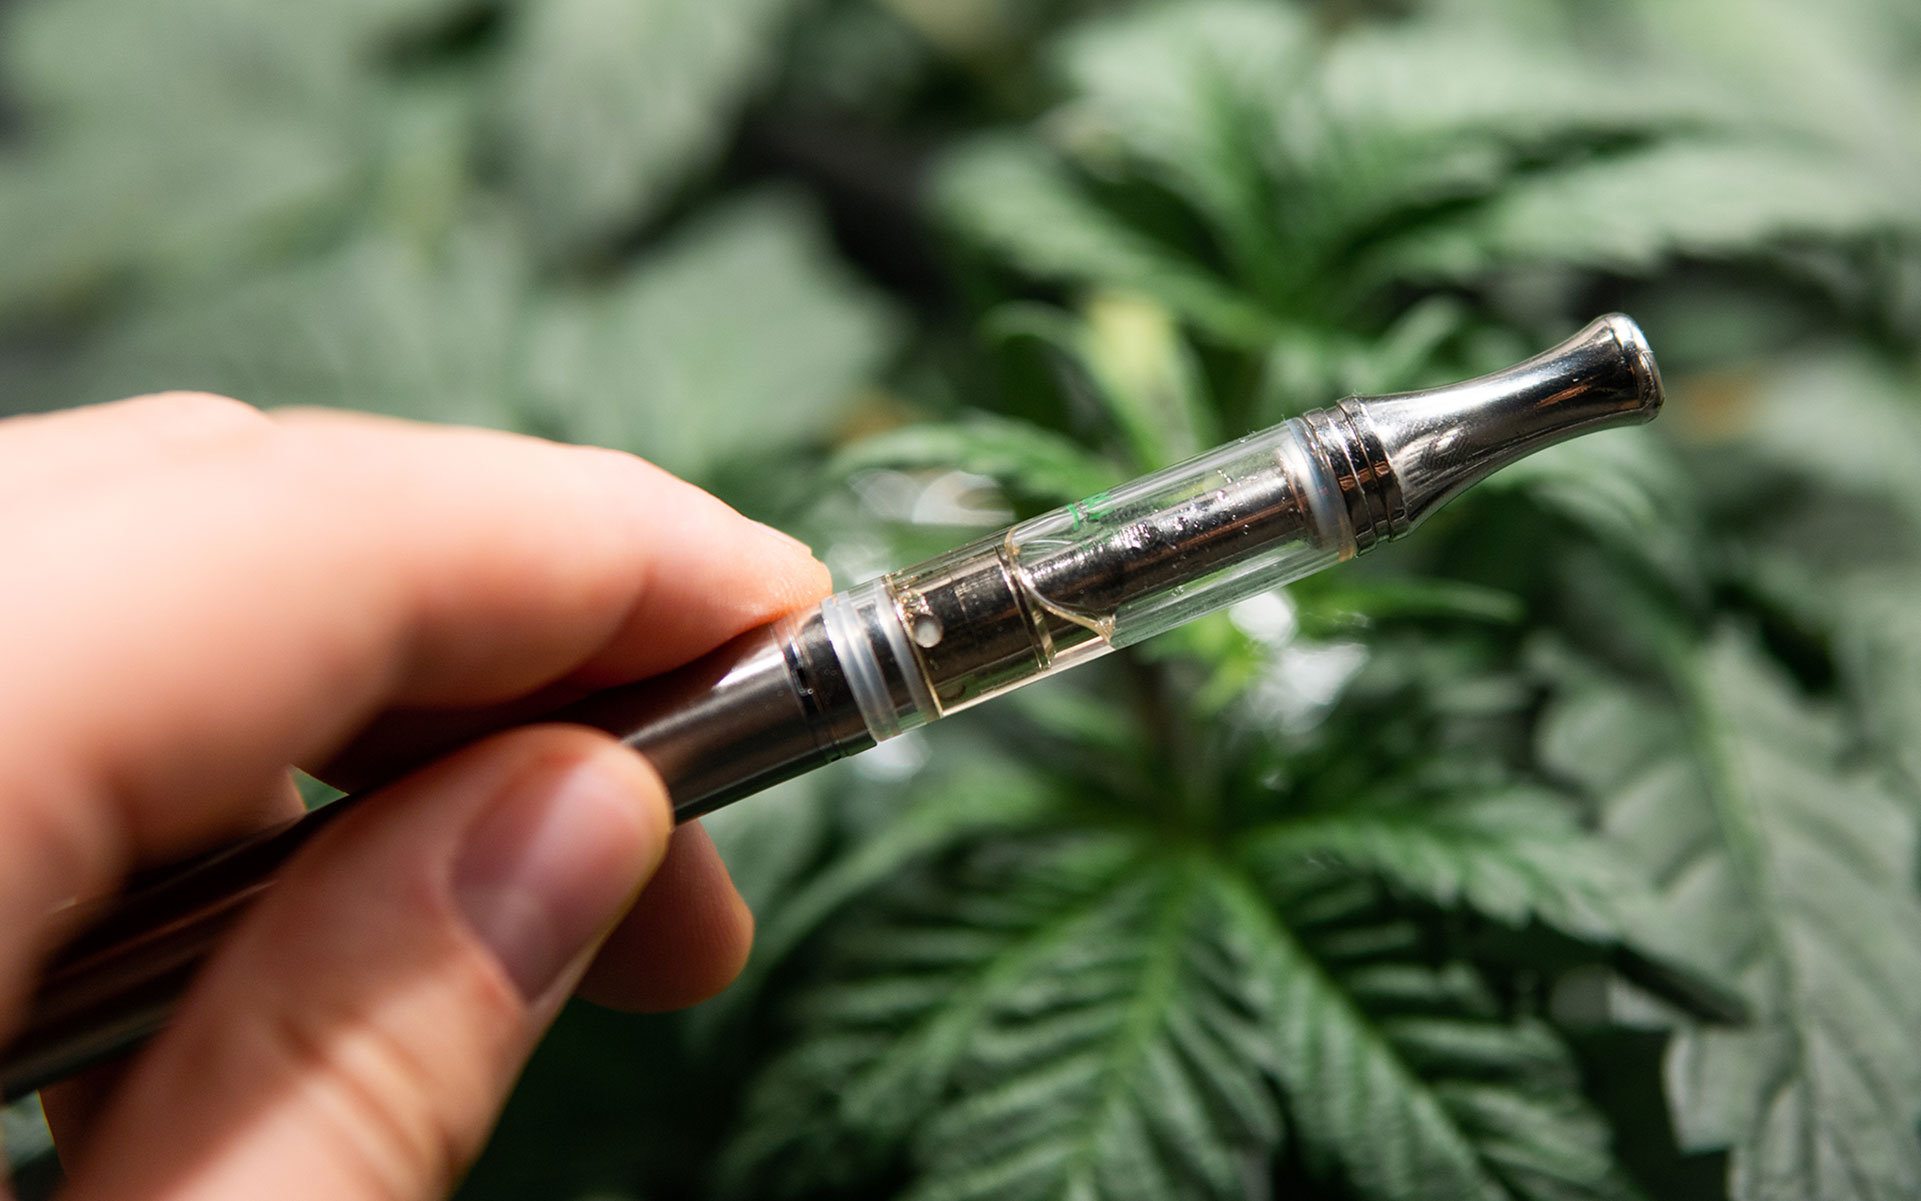 Vaping Weed May Actually Be Worse for Your Lungs Than Smoking Cigarettes, Study Says